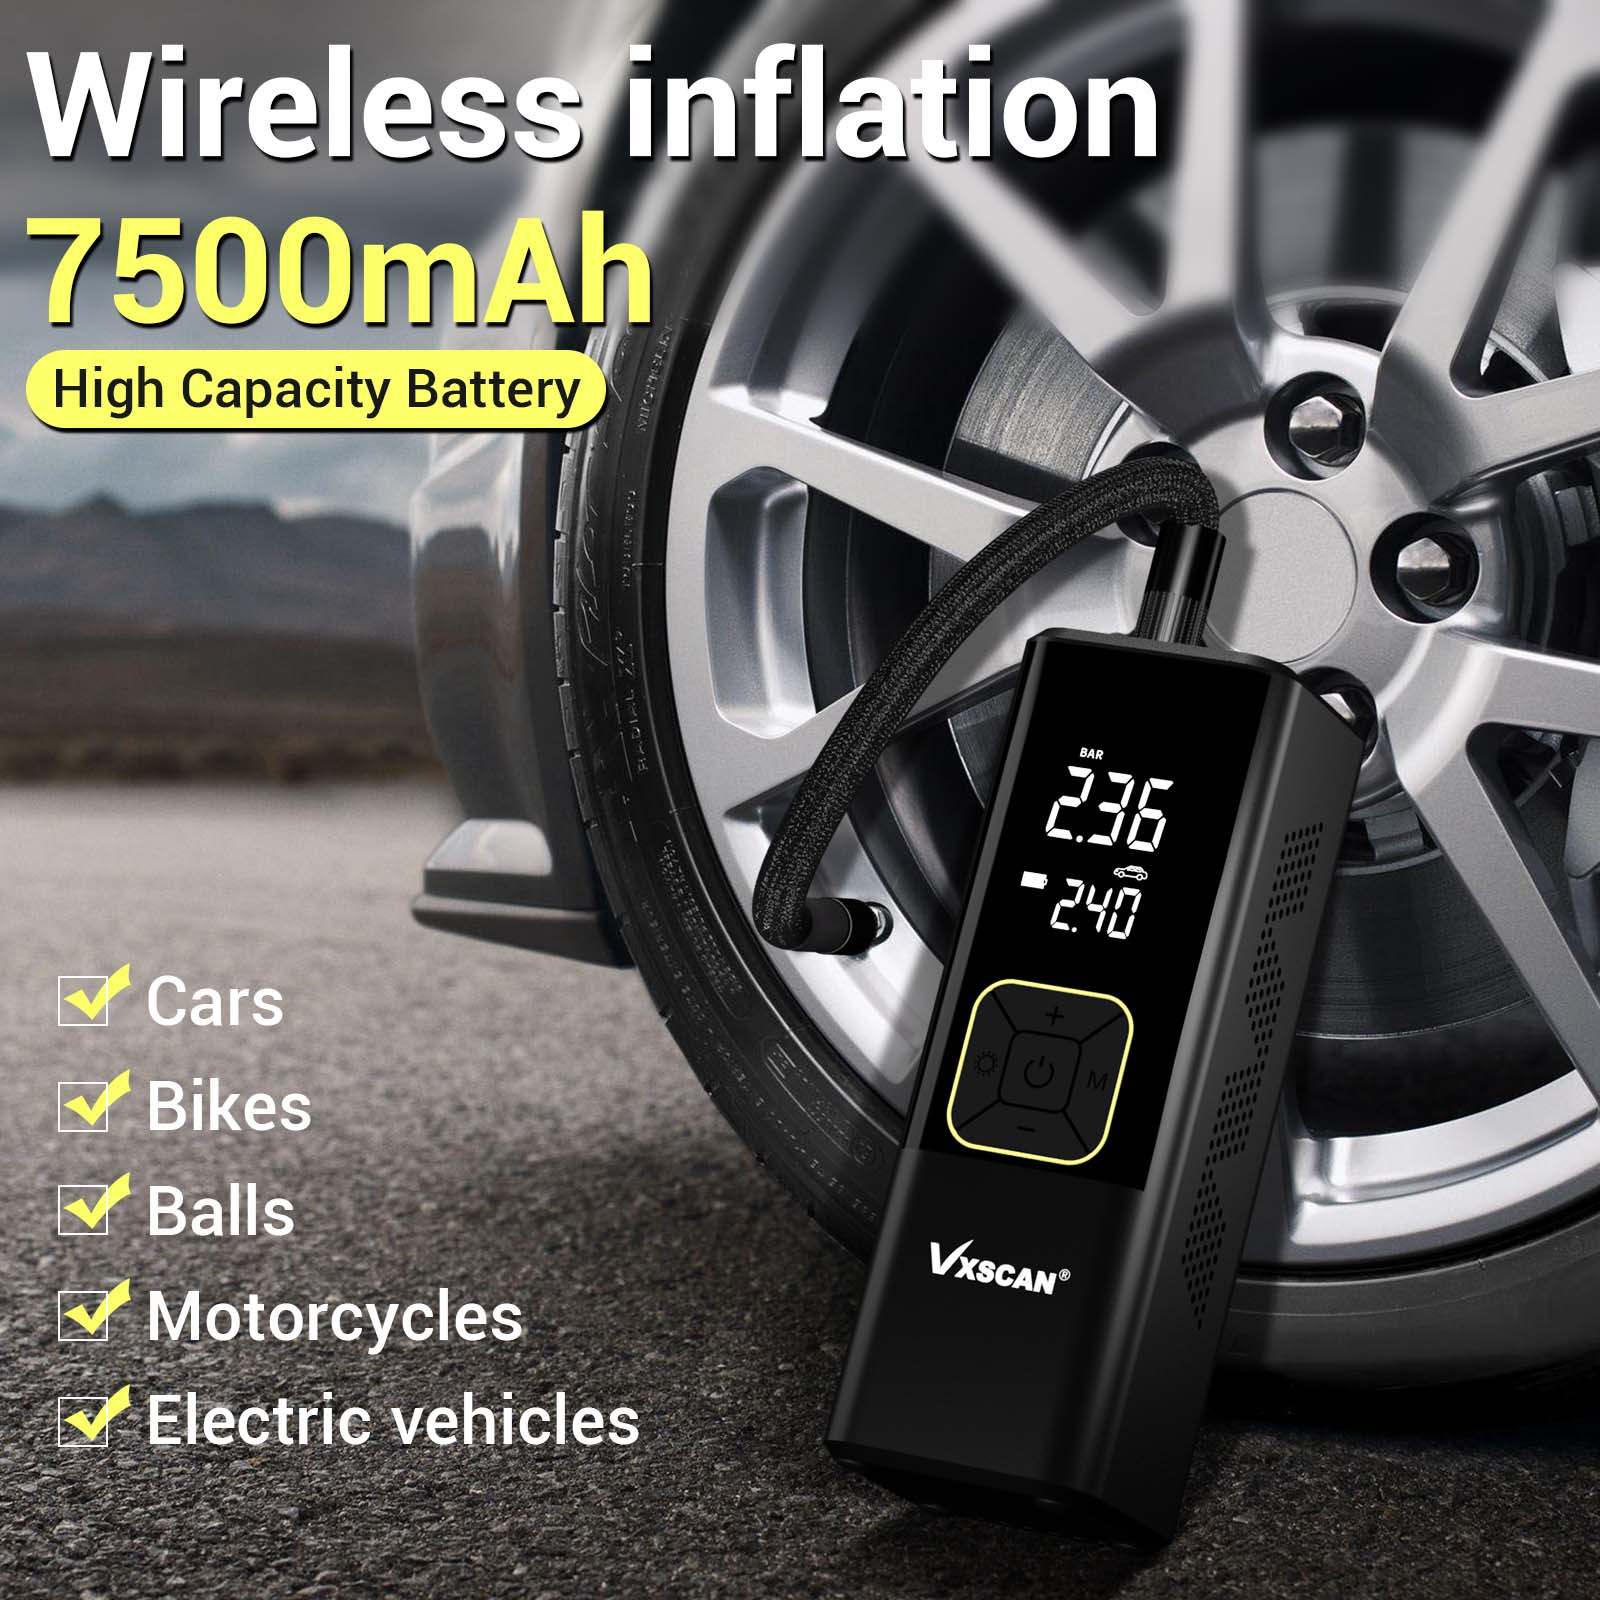 Tire Inflator Portable Air Compressor 150PSI & 6000mAh Portable Cordless  Air Pump Accurate Pressure LCD Display 3X Fast Inflation for Cars Bikes